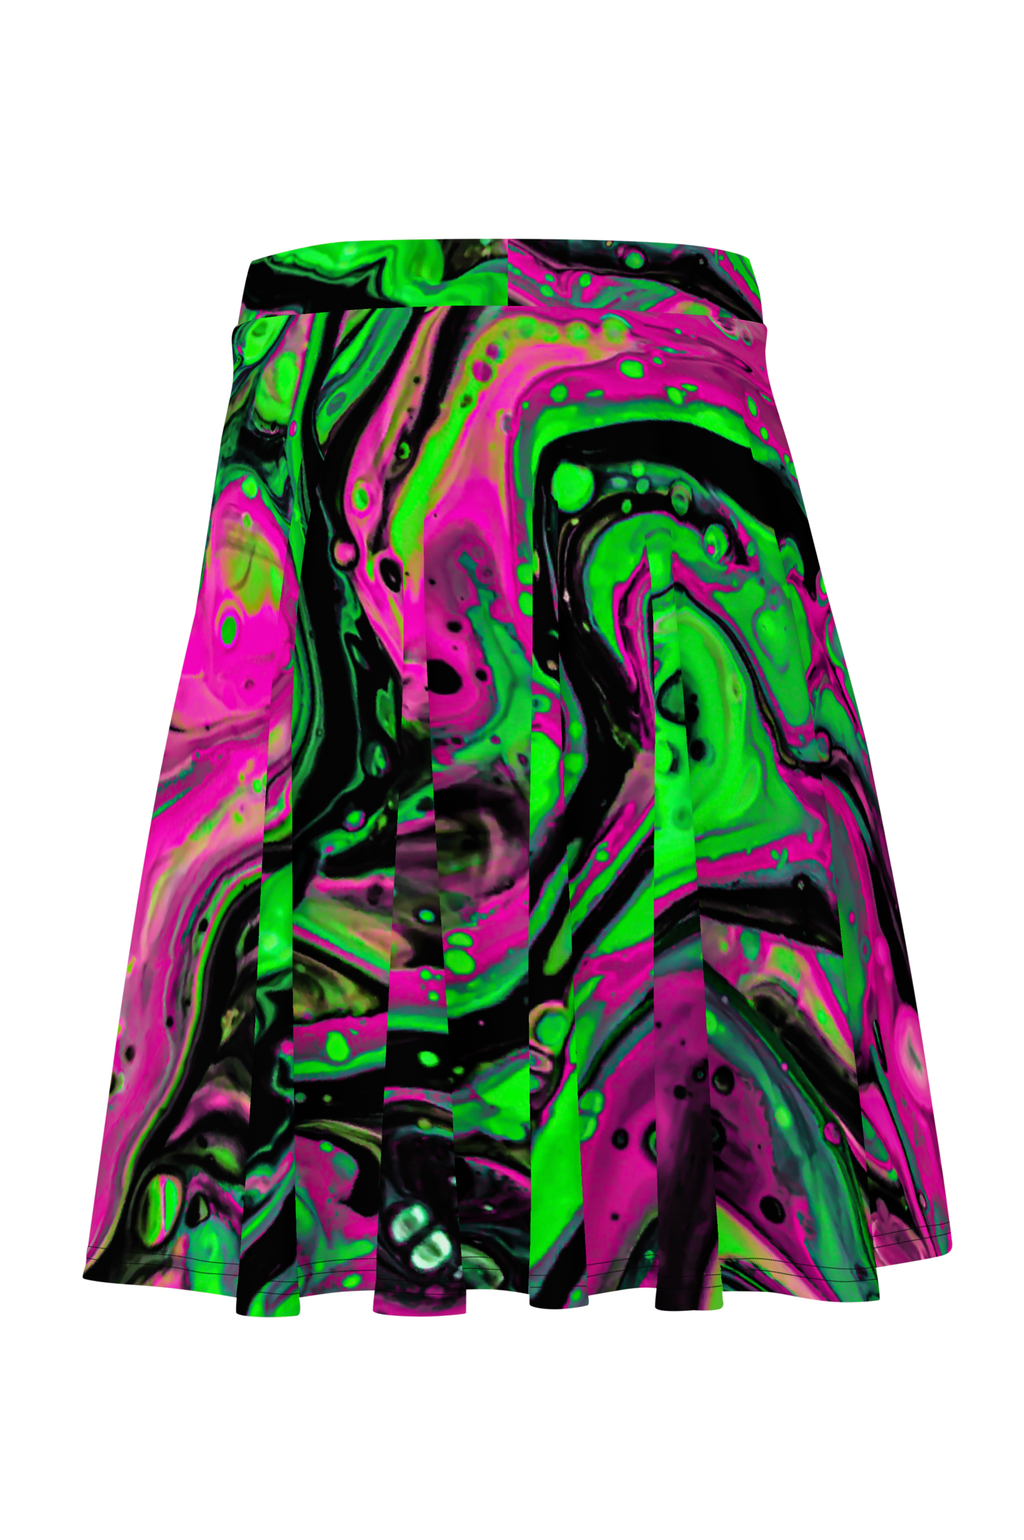 Dirty Drops Skater Skirt (Made to Order) - Acid Waves